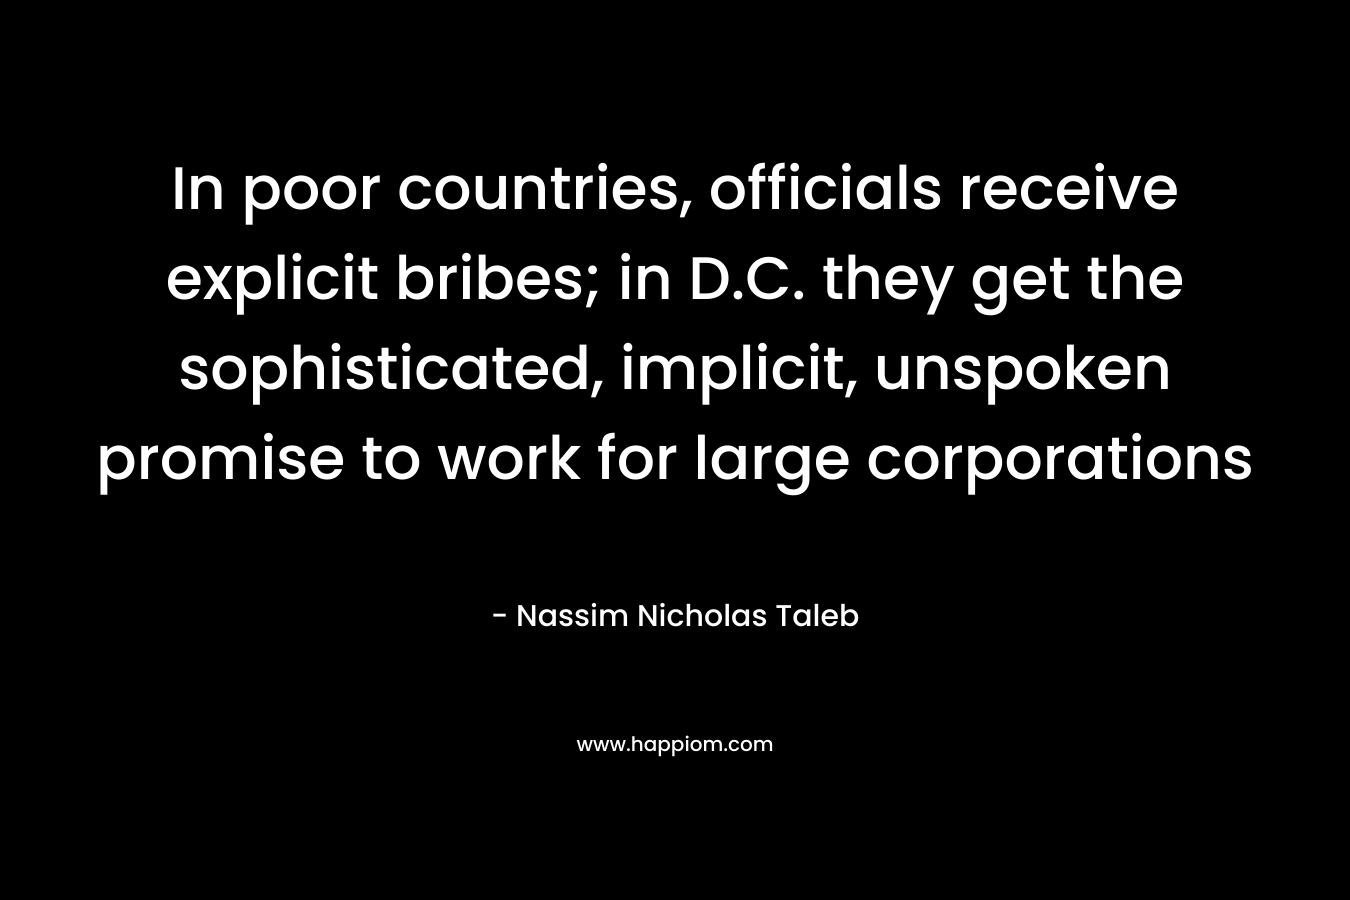 In poor countries, officials receive explicit bribes; in D.C. they get the sophisticated, implicit, unspoken promise to work for large corporations